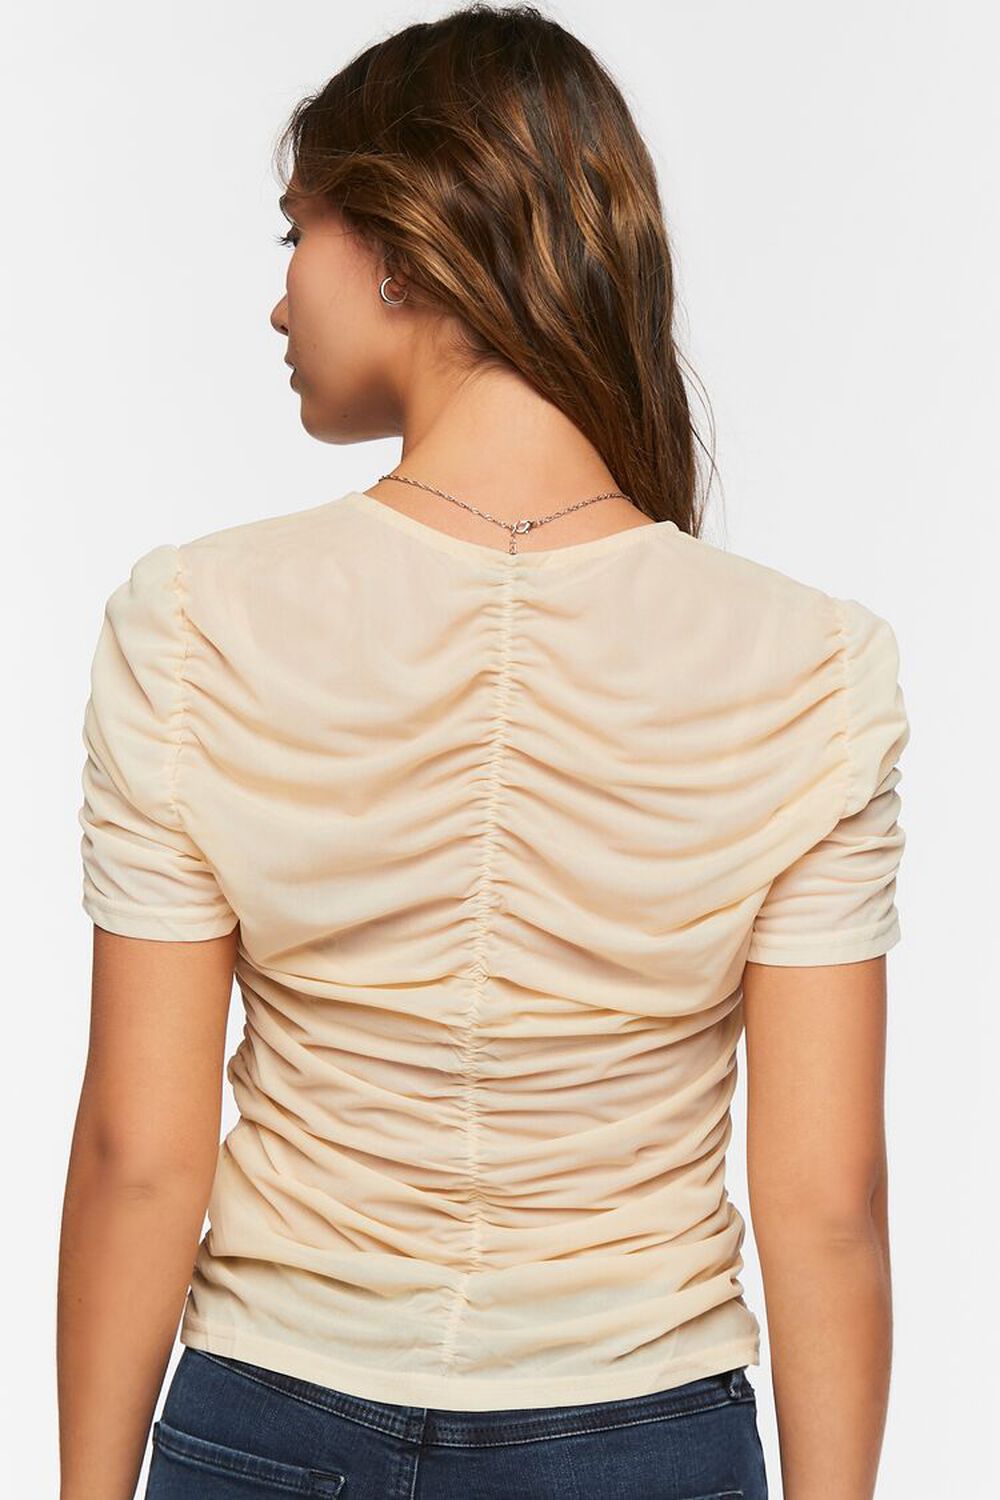 BEIGE Ruched Keyhole Top, image 3